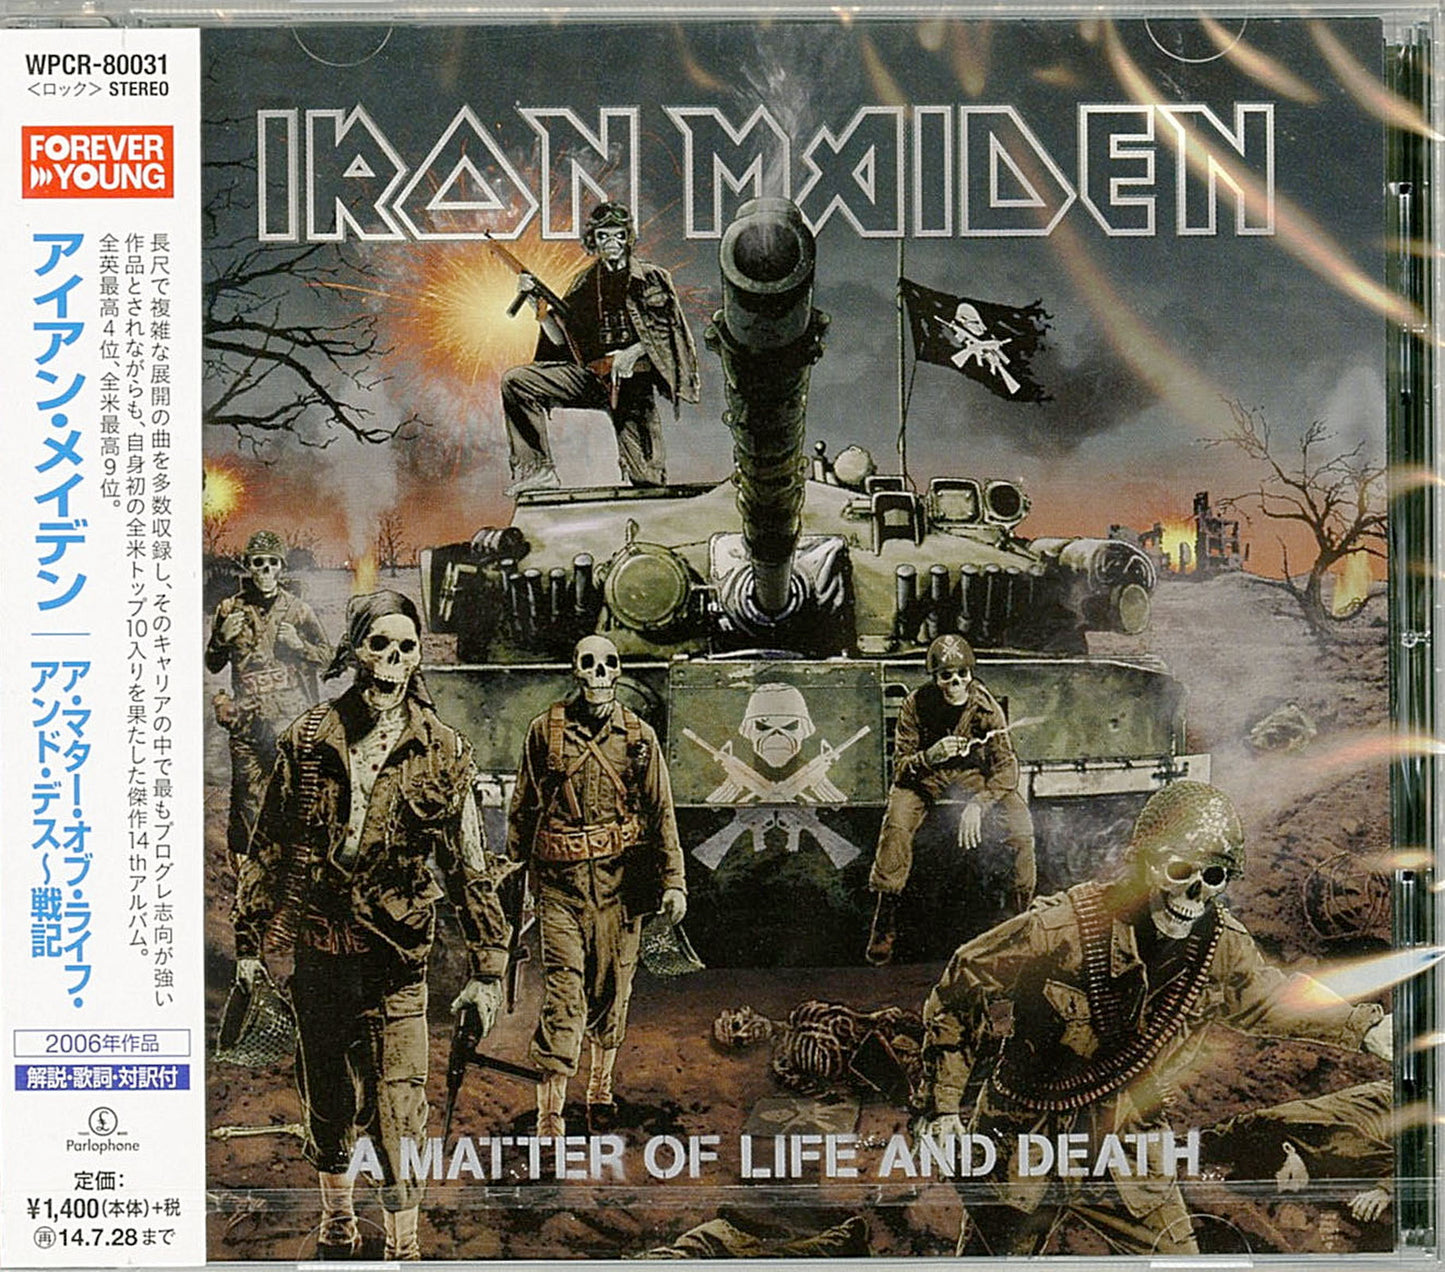 Iron Maiden - A Matter Of Life And Death - Japan CD